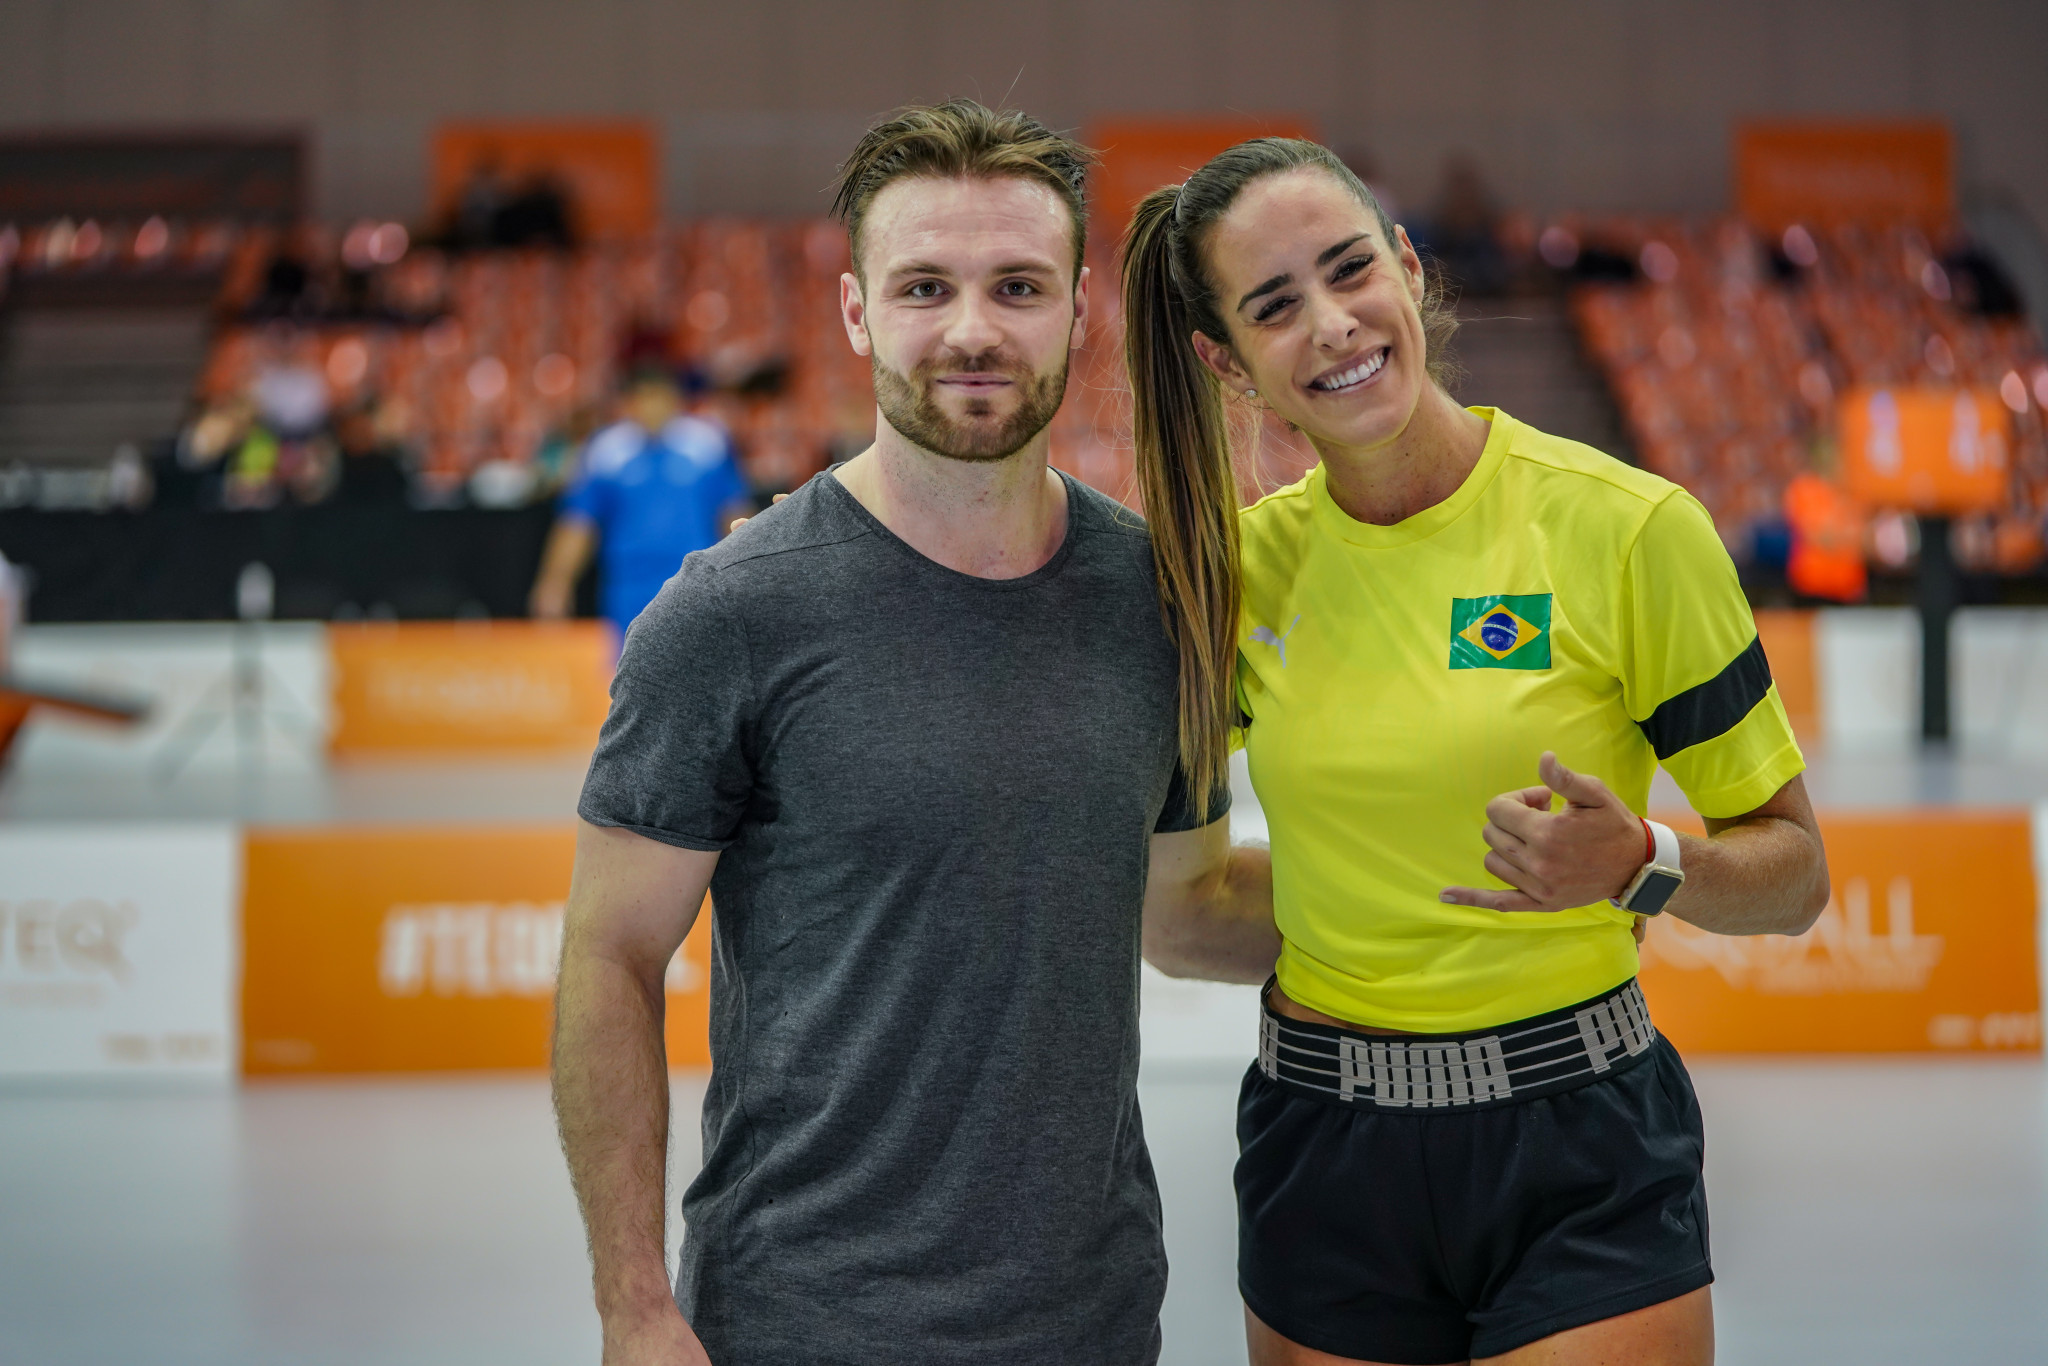 Natalia Guitler of Brazil was elected to the FITEQ Athletes' Committee ©FITEQ